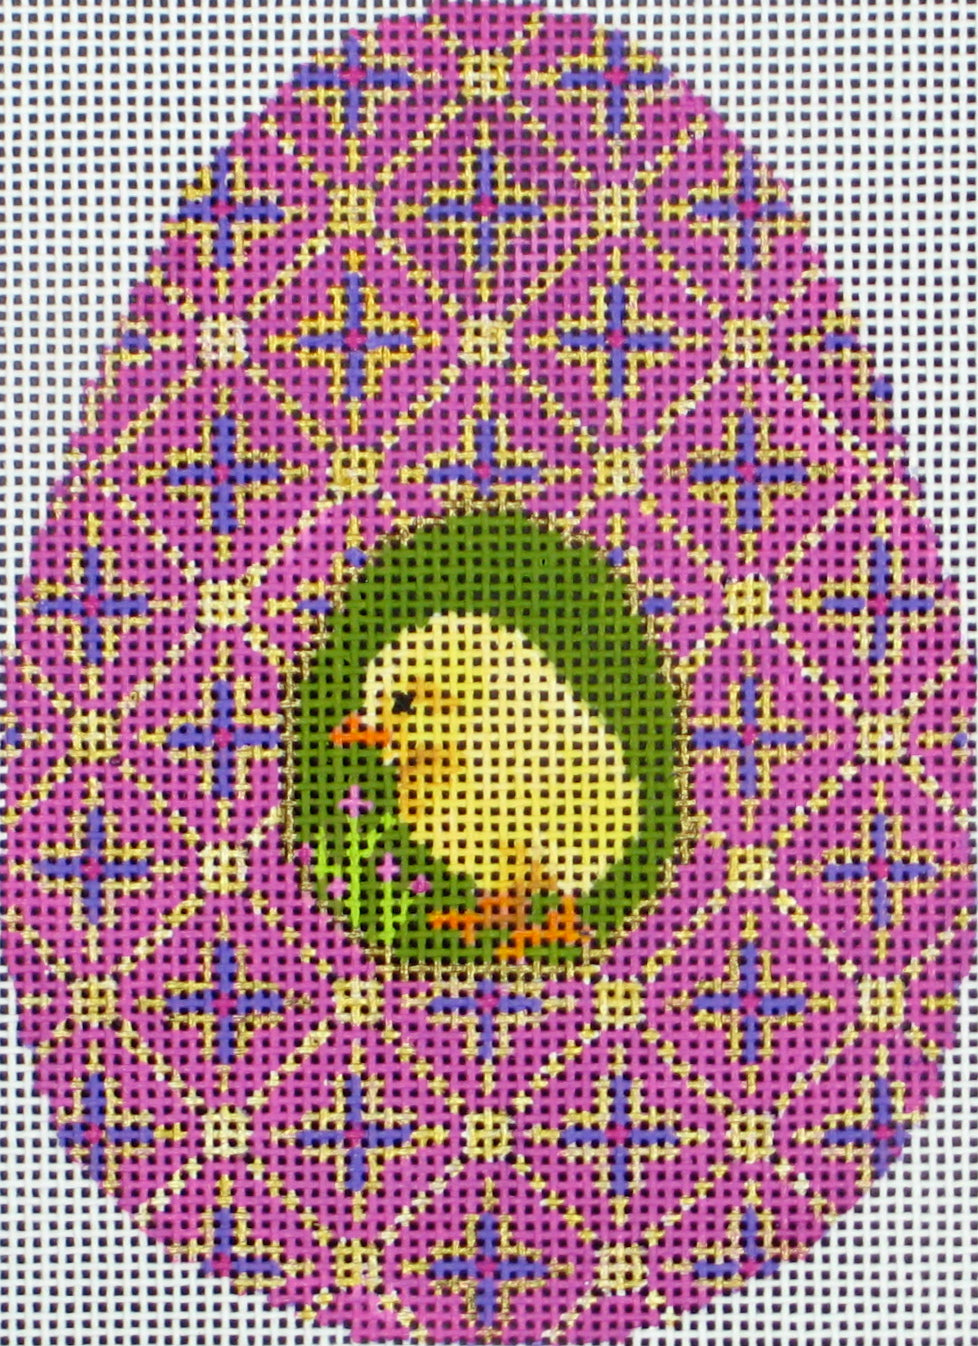 Amanda Lawford Easter egg shaped needlepoint canvas with chick on a purple geometric background